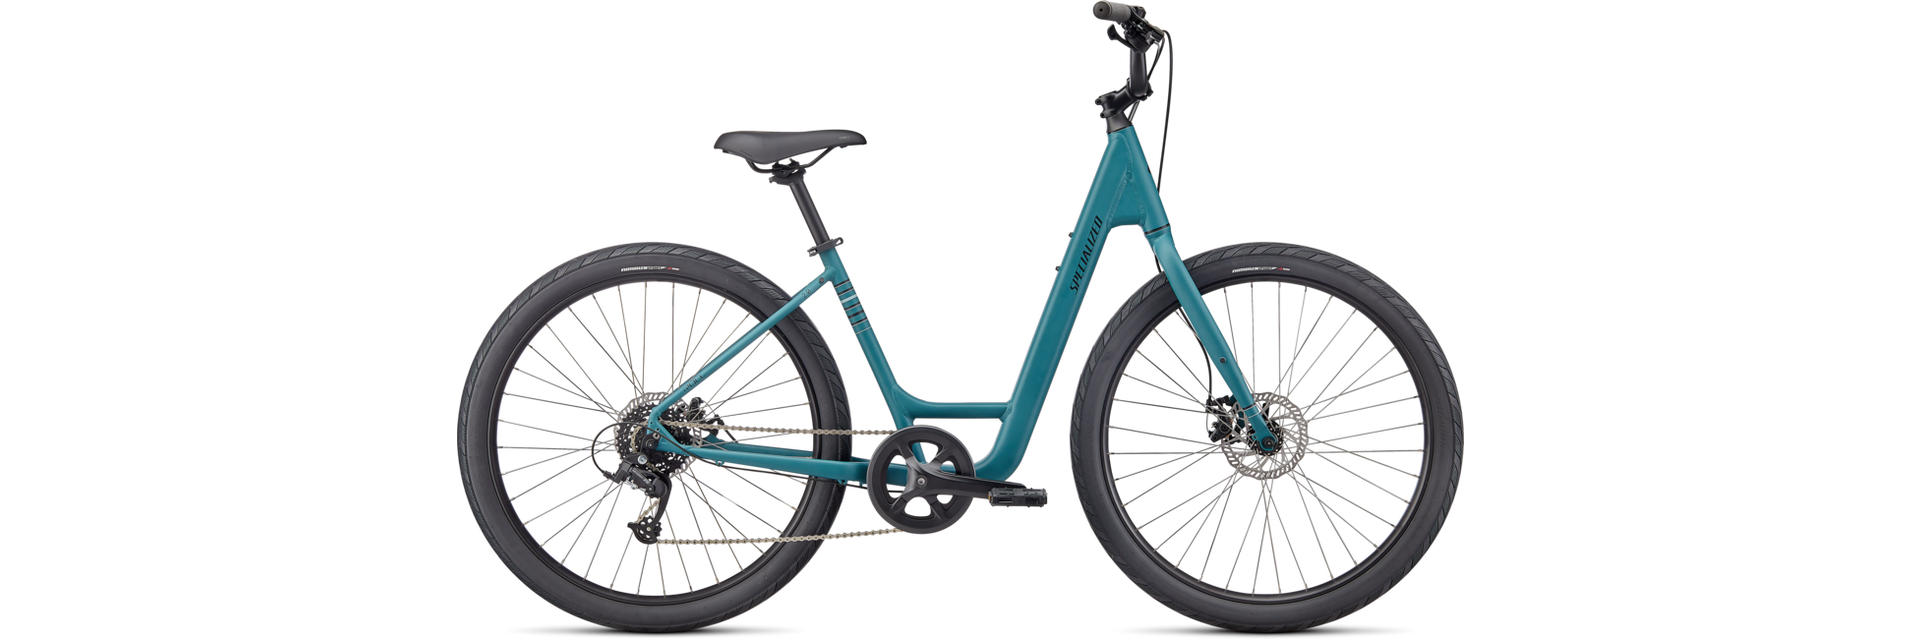 SPECIALIZED Roll 2.0 Low Entry Bike, L Satin Dusty Turquoise/Summer Blue/Satin Black Reflective Tur/blu/blk